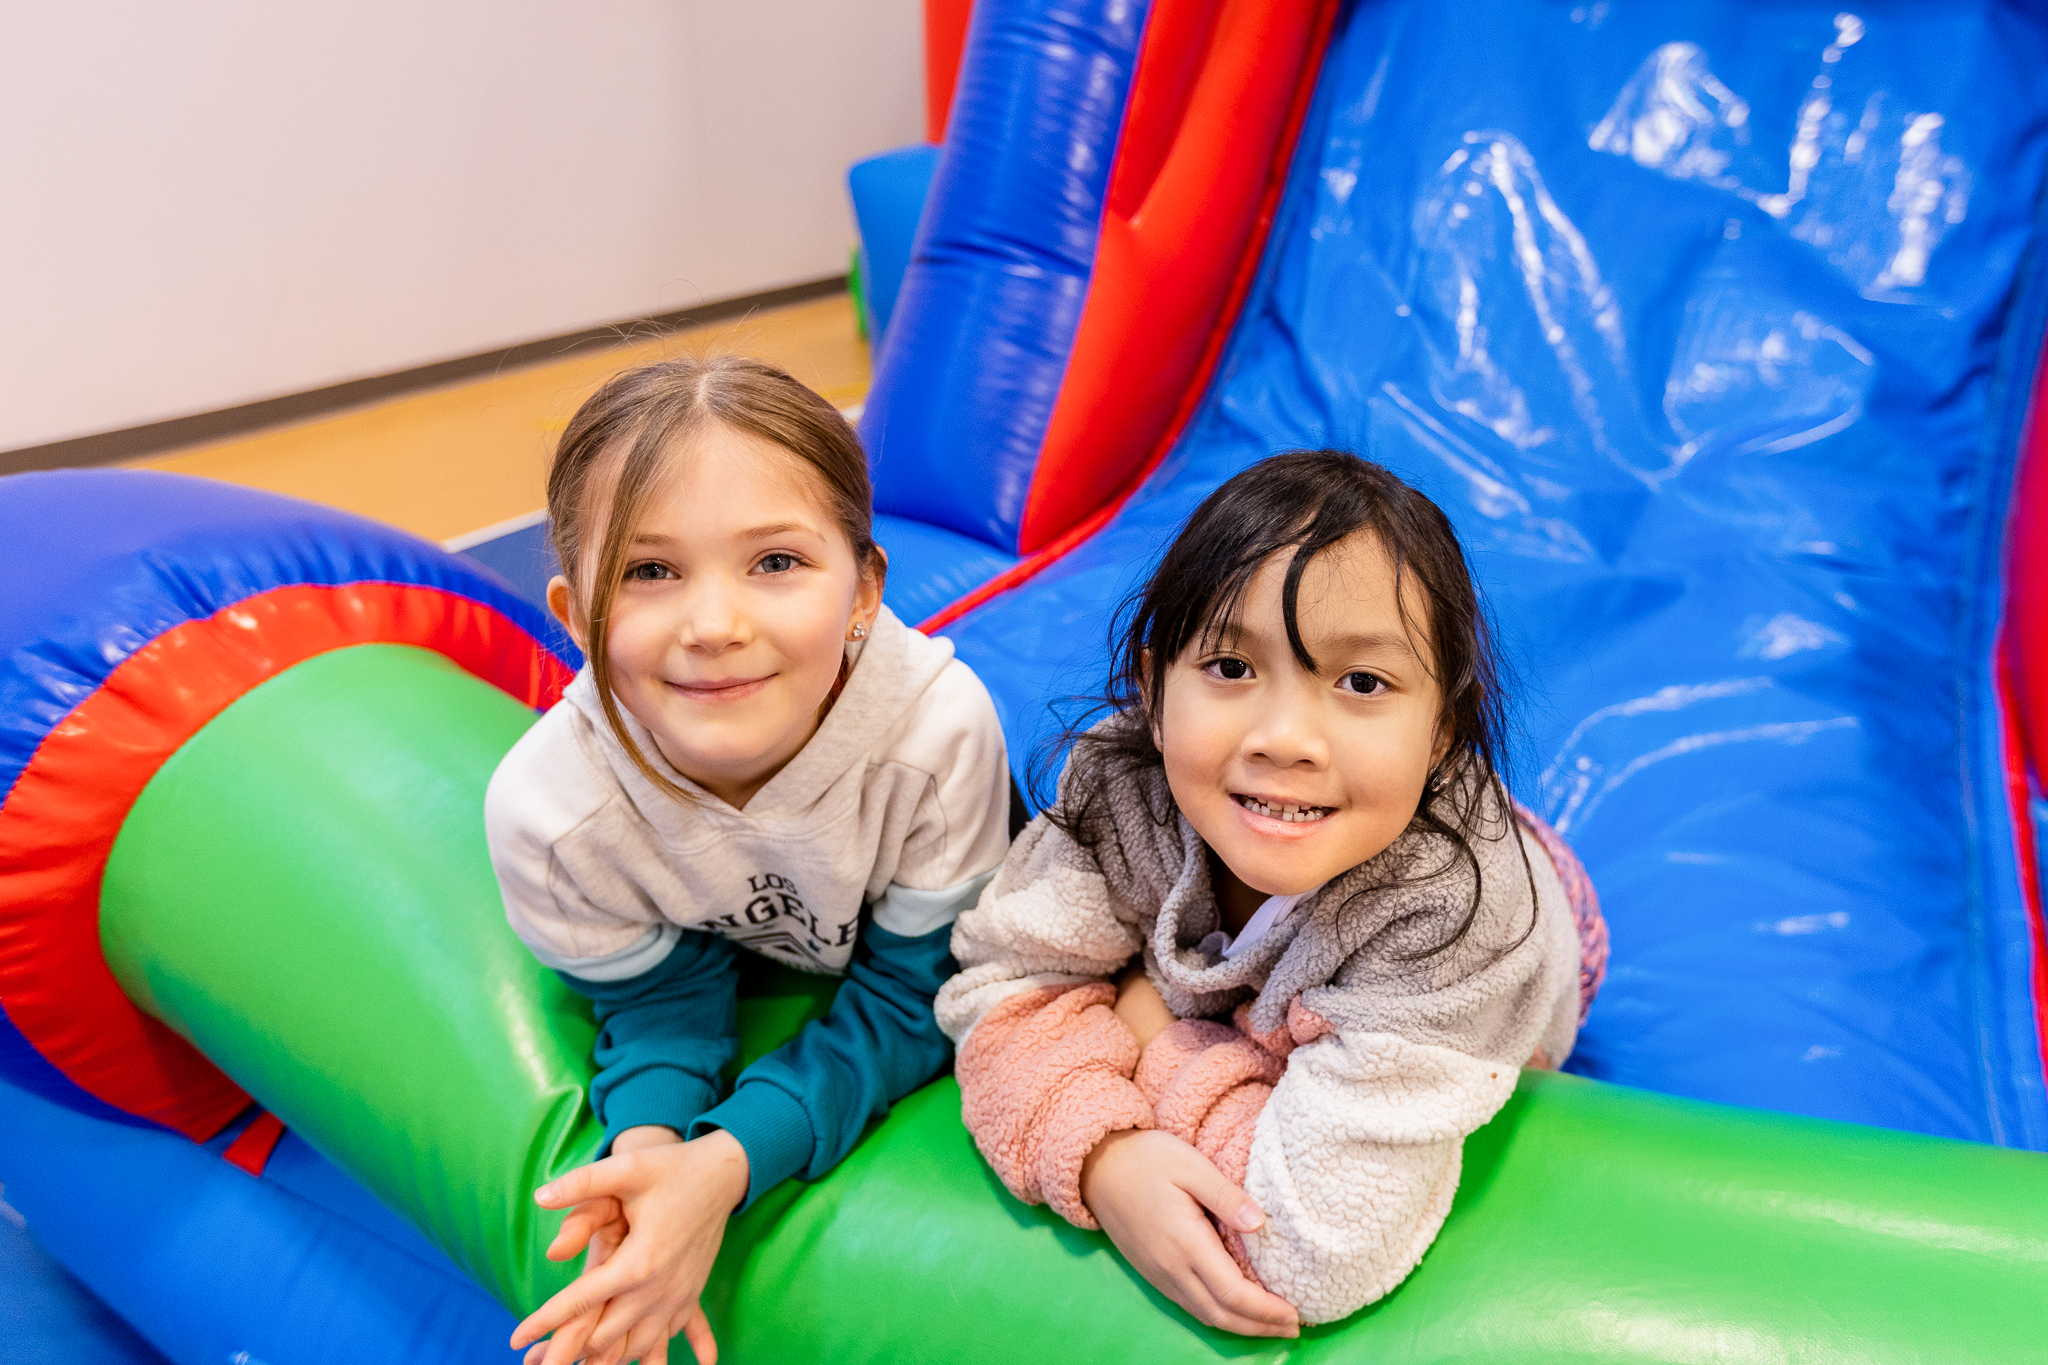 two young girls smile for a photo on a bouncy house